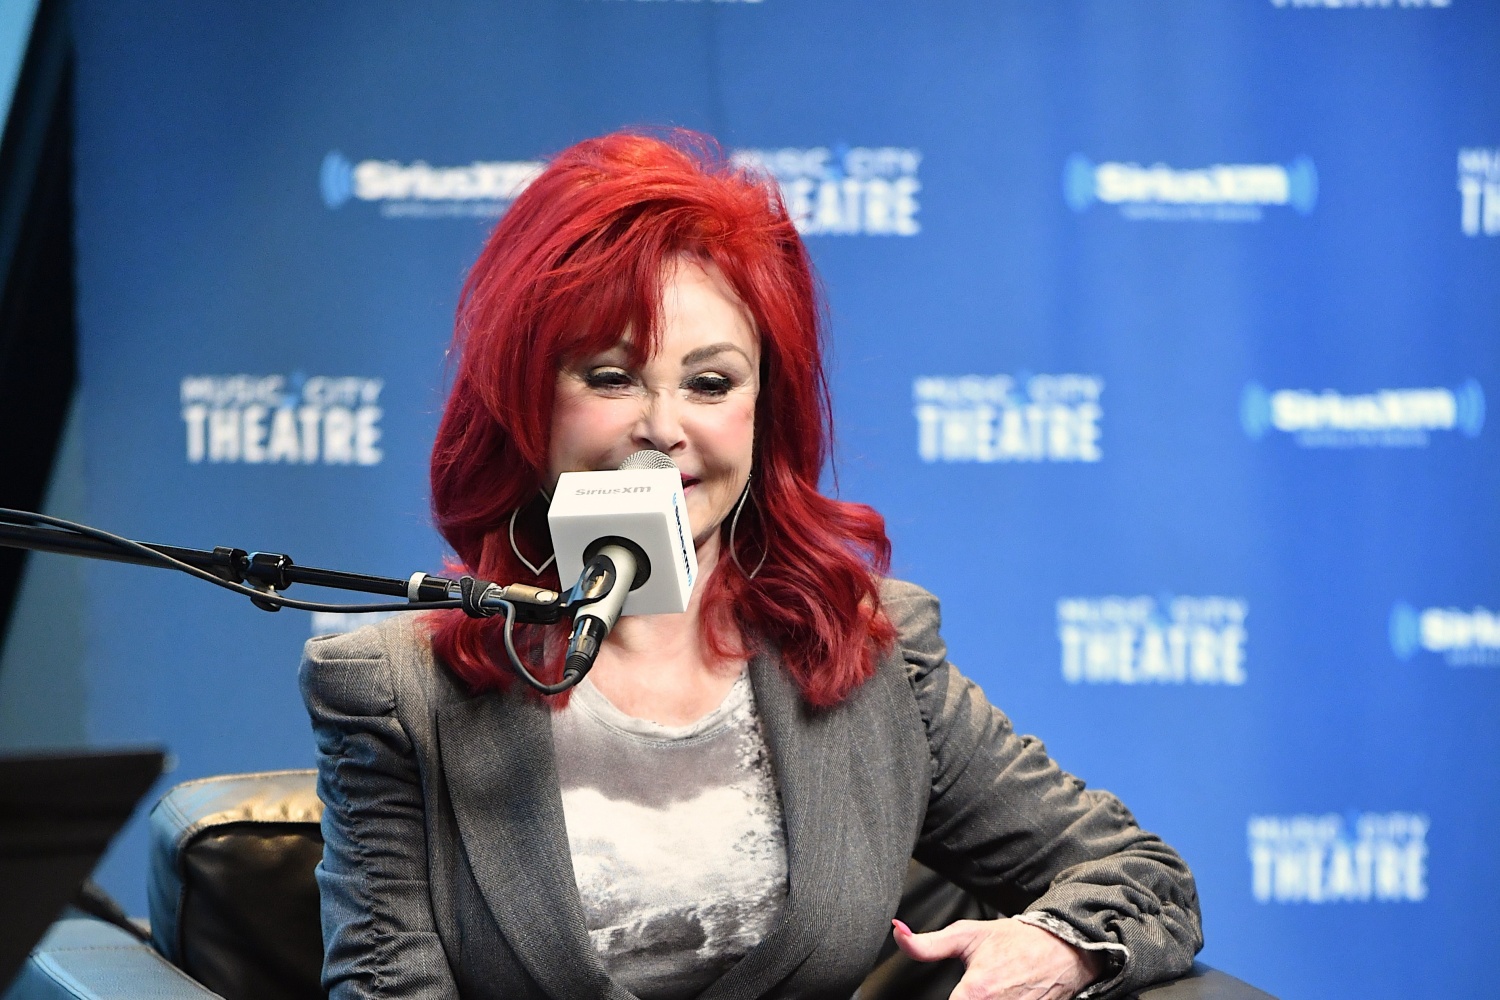 How Naomi Judd Inspired Flat River Band's New Single After Her Death